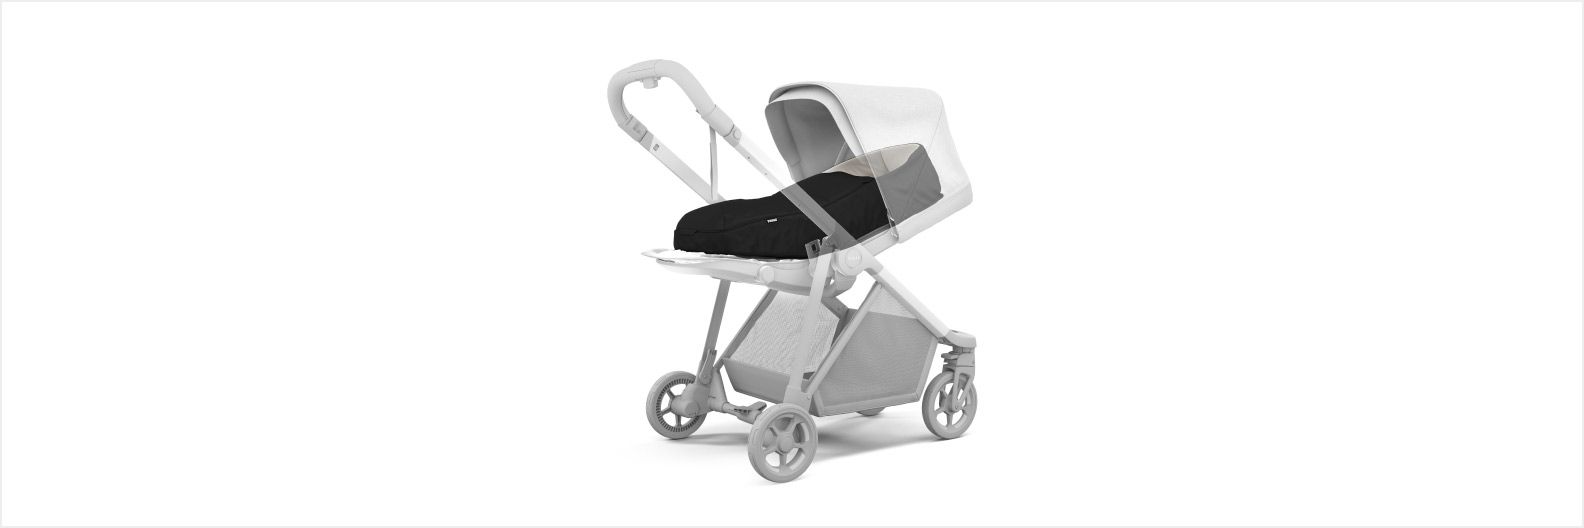 On a white background, there is a 3D rendition of the Thule Shine newborn stroller with a newborn nest.